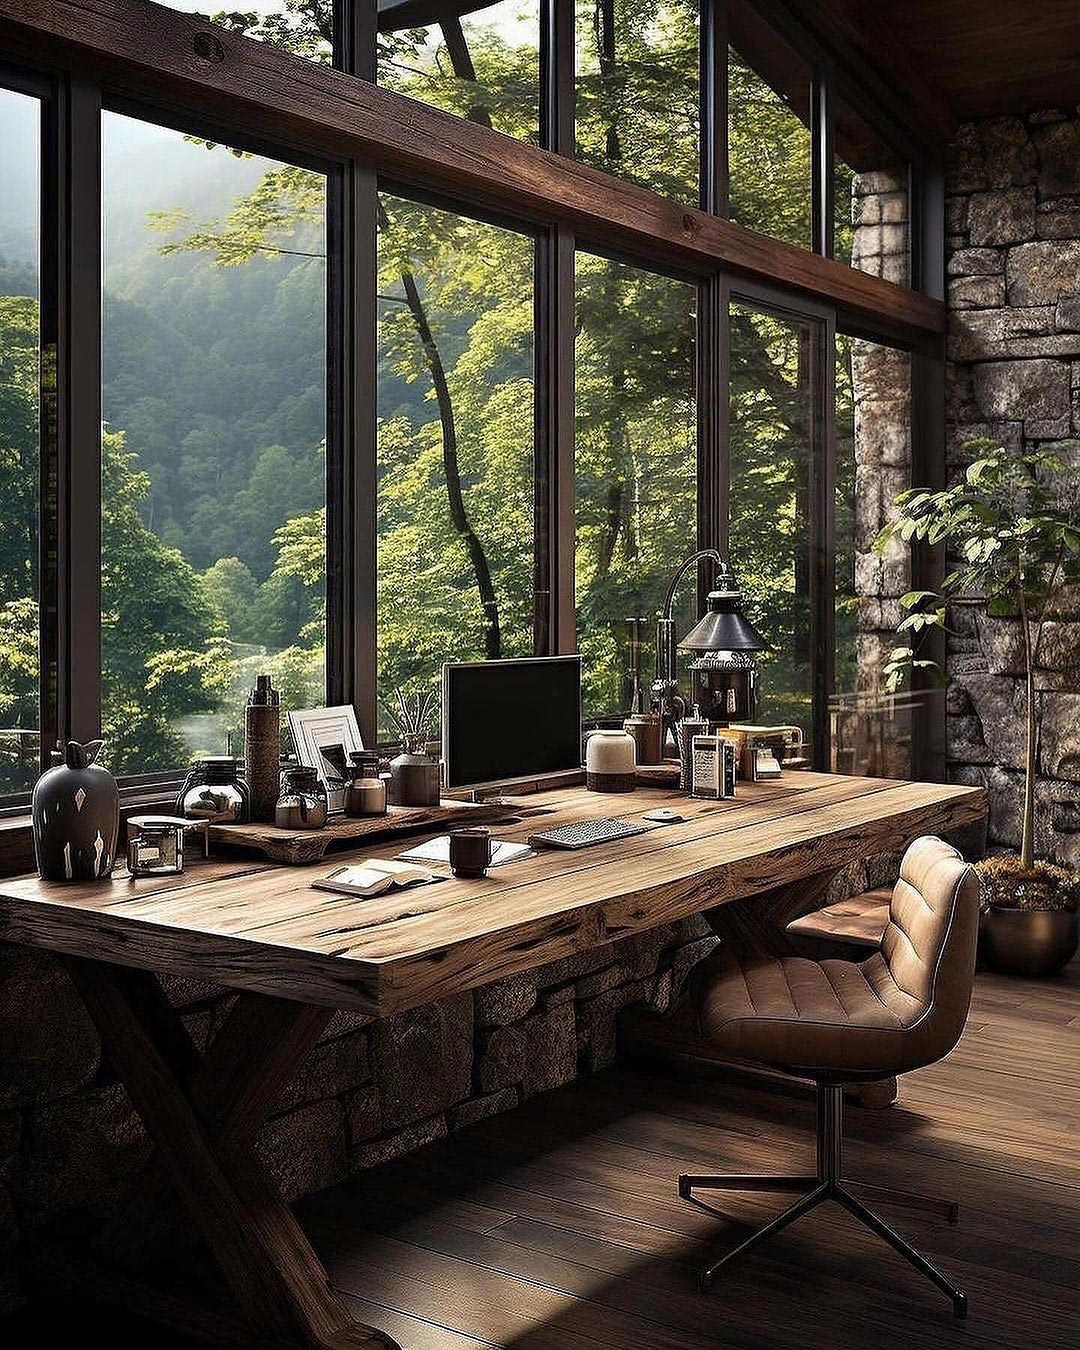 Large wood desk in home office overlooking nature outdoors